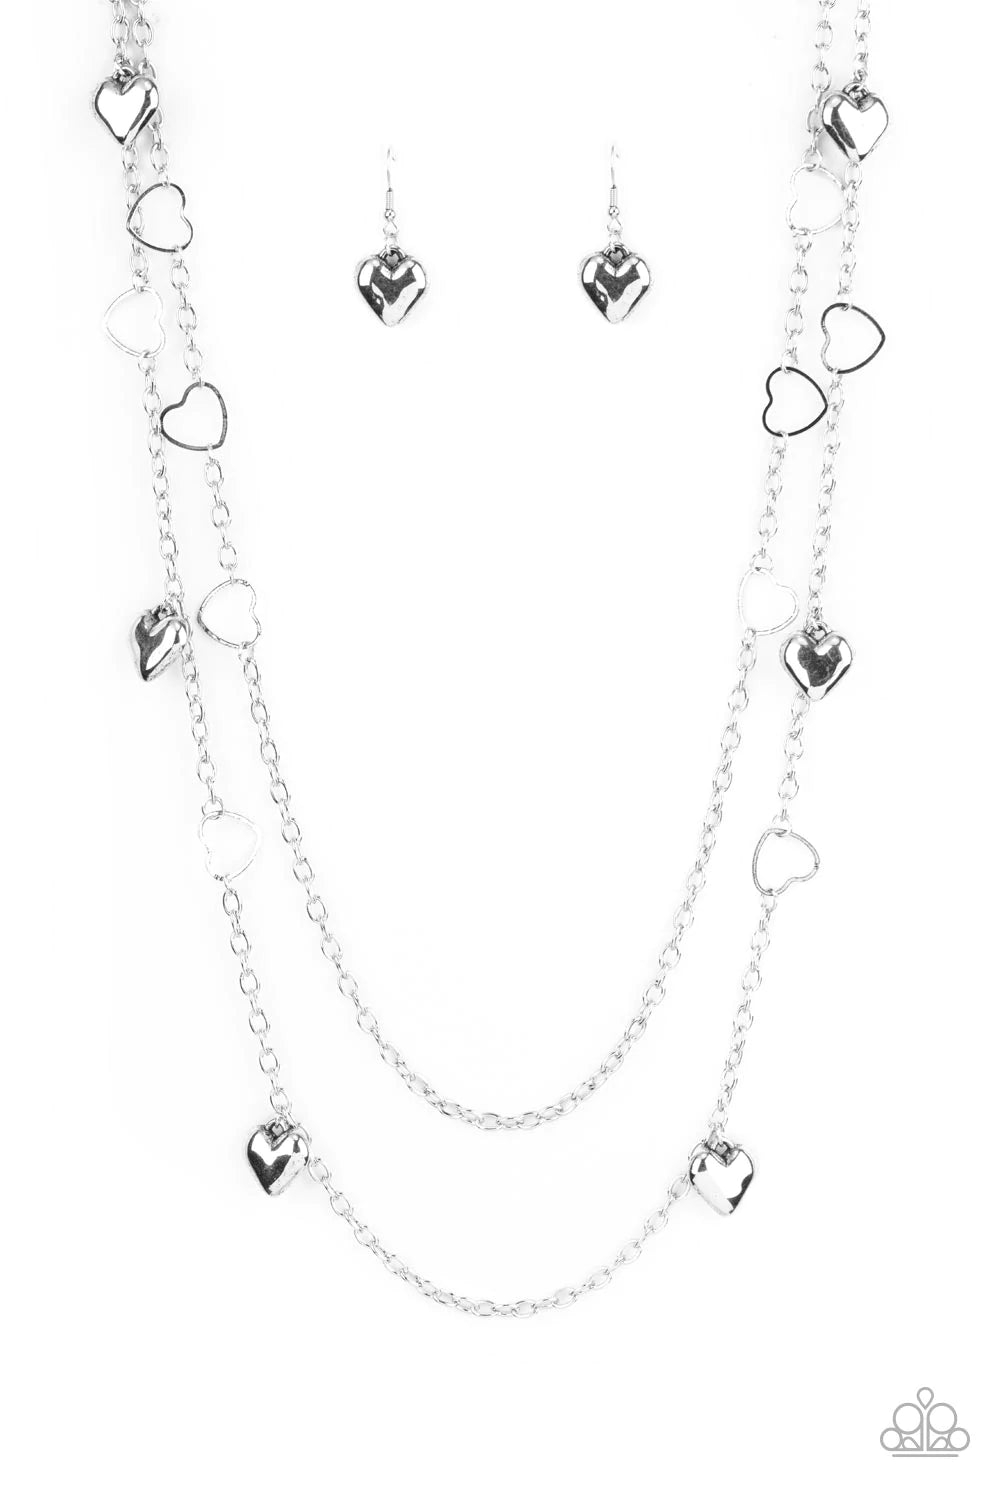 Paparazzi Accessories Chicly Cupid - Silver Airy silver heart frames delicately link with sections of classic silver chains across the chest, creating flirtatious layers. Solid silver heart charms whimsically swing from the display, reminiscent of vintage